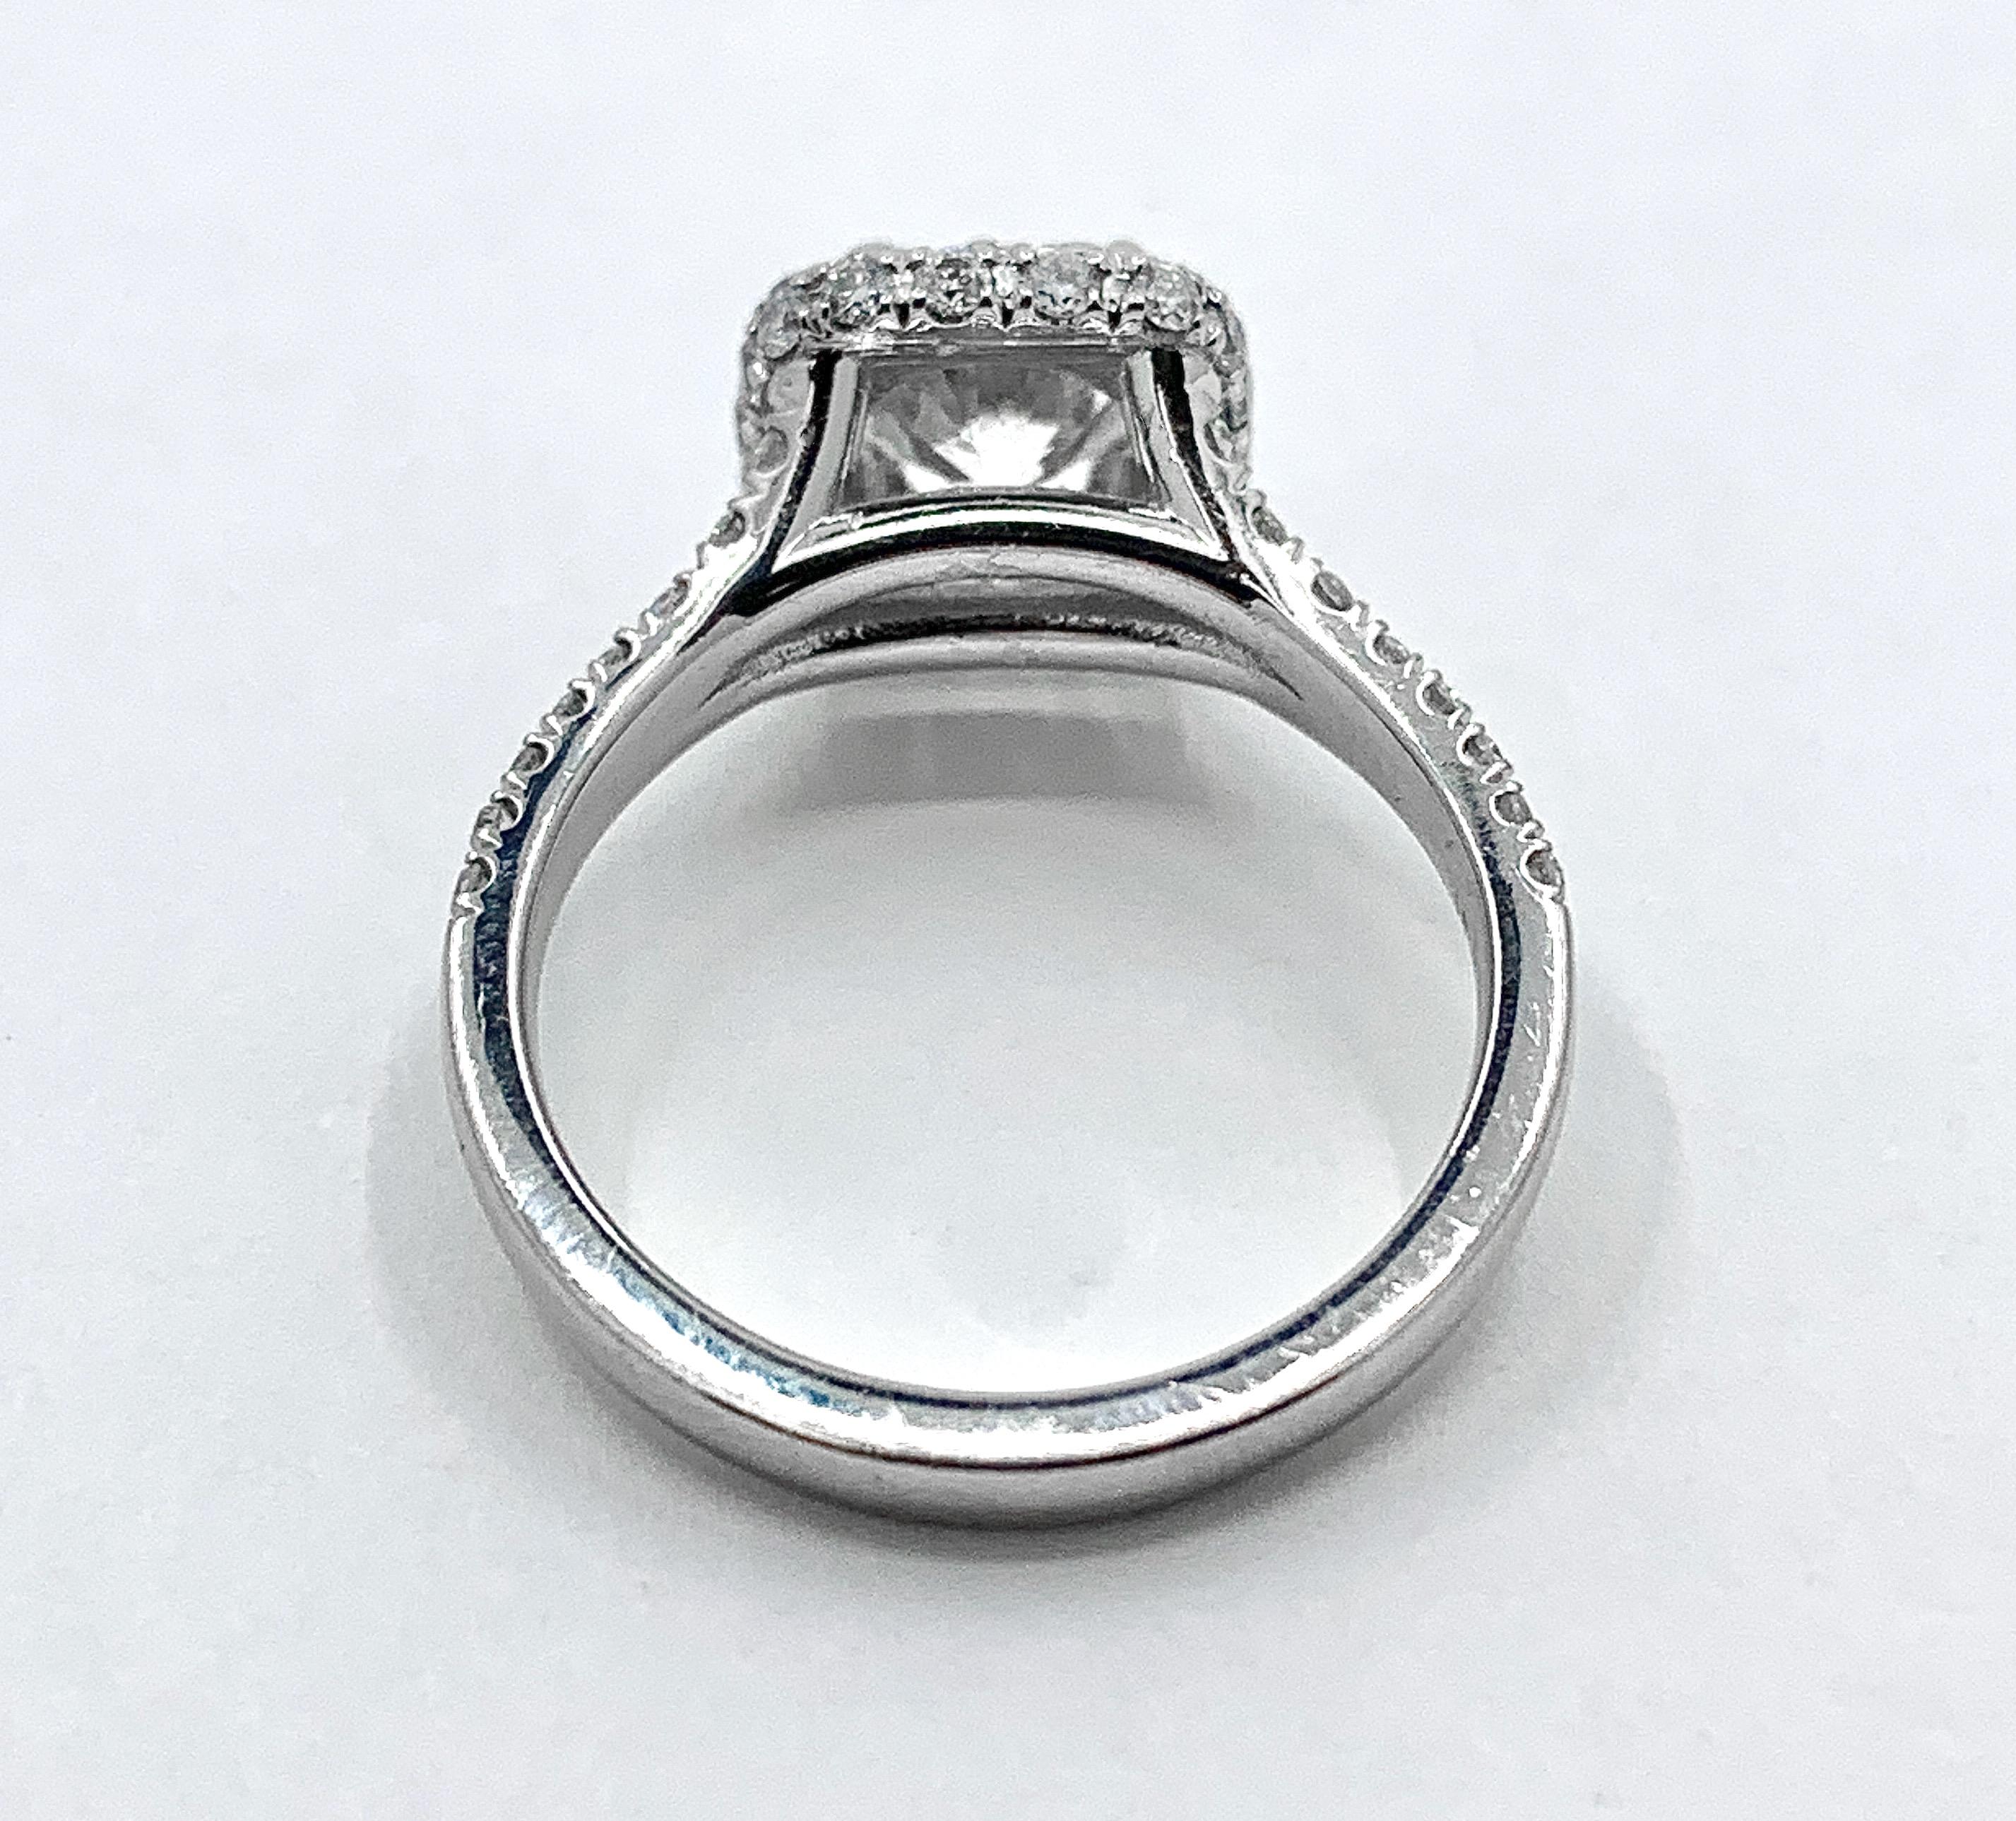 Certified 1.04 Carat Round Diamond in Square Halo Engagement Ring in Platinum In New Condition For Sale In Sherman Oaks, CA